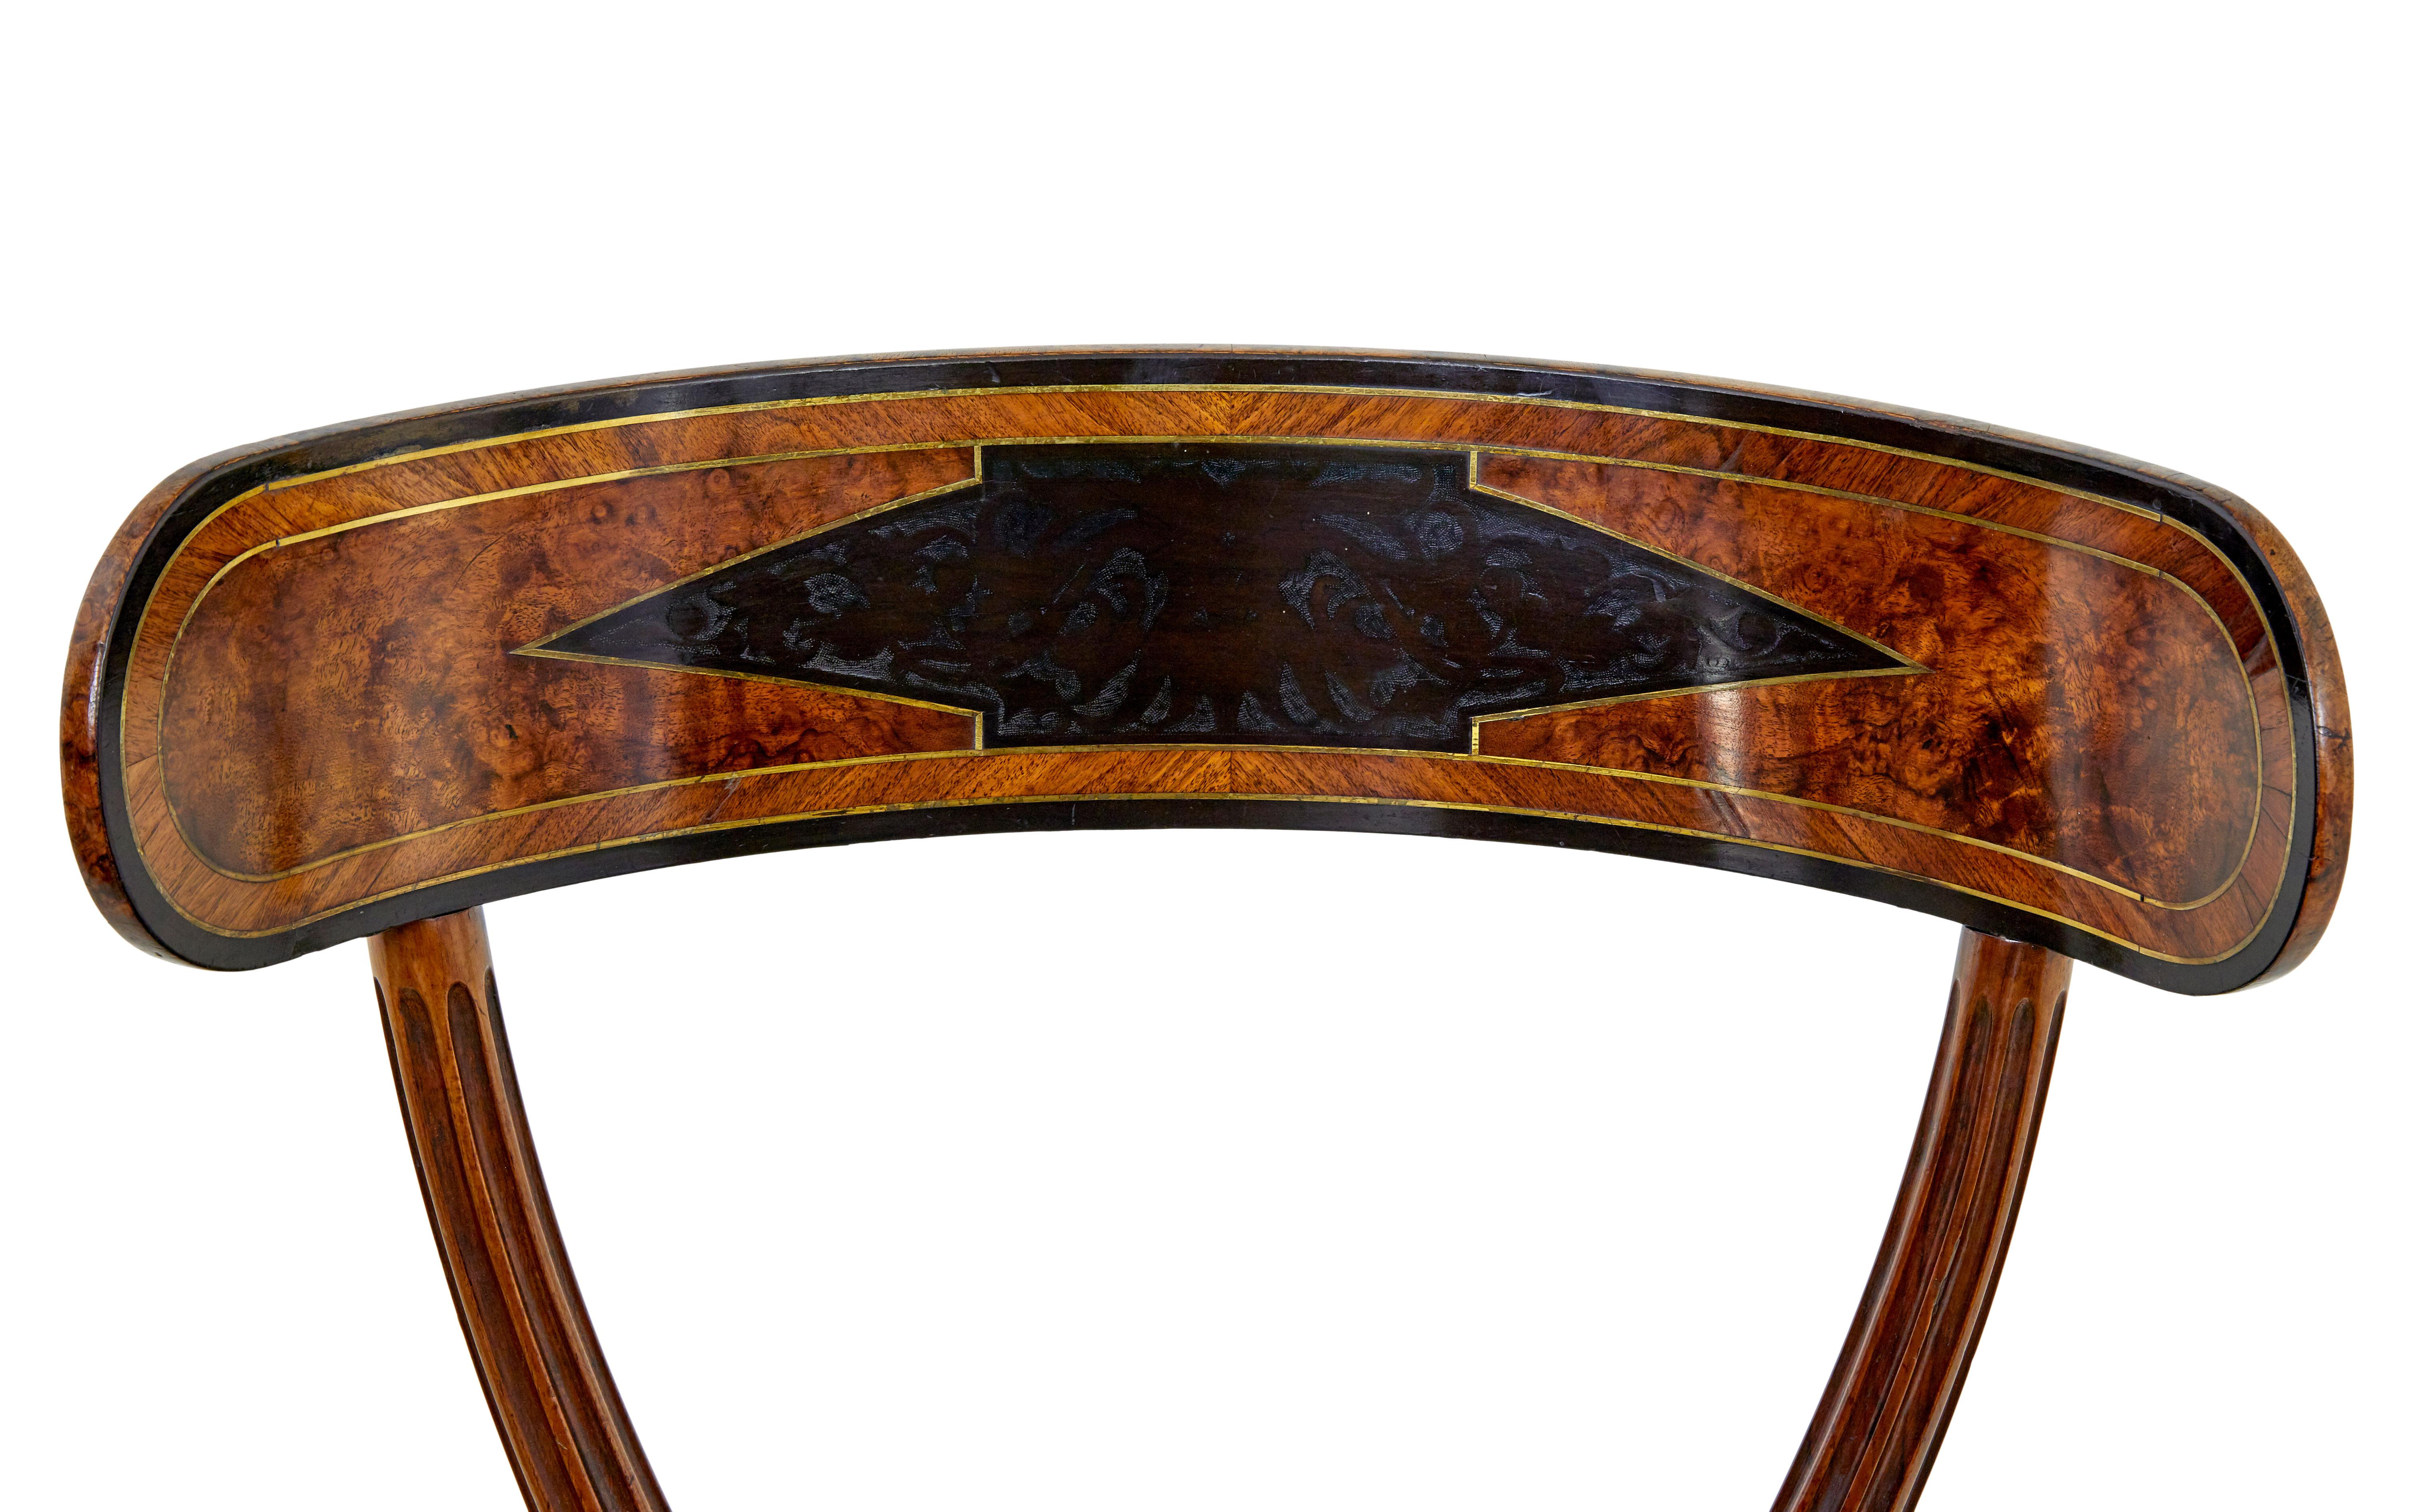 Eclectic 19th century carved walnut desk and chair For Sale 8